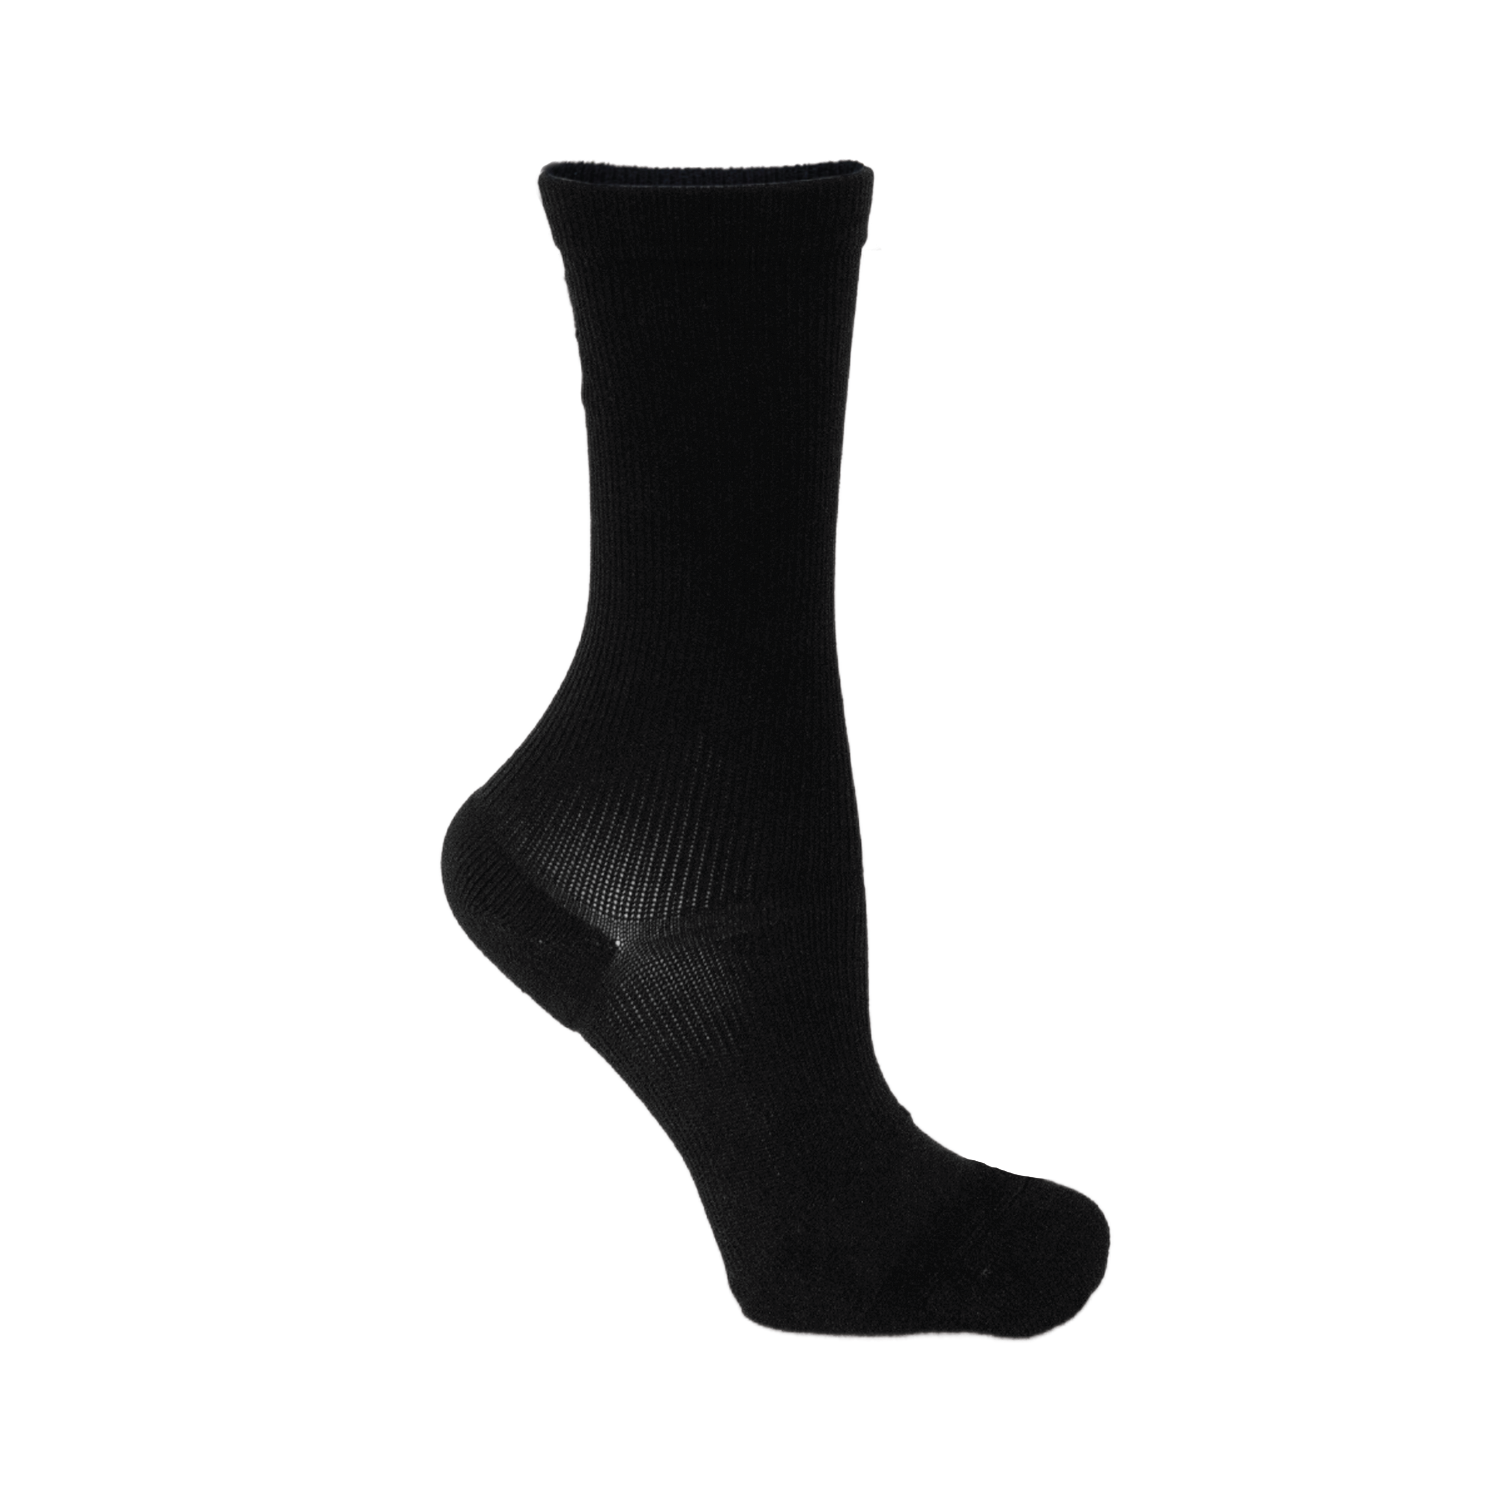 APOLLA PERFORMANCE SHOCK REVIEW: Testing These Dance Socks for Ankle  Support and Arch Support 